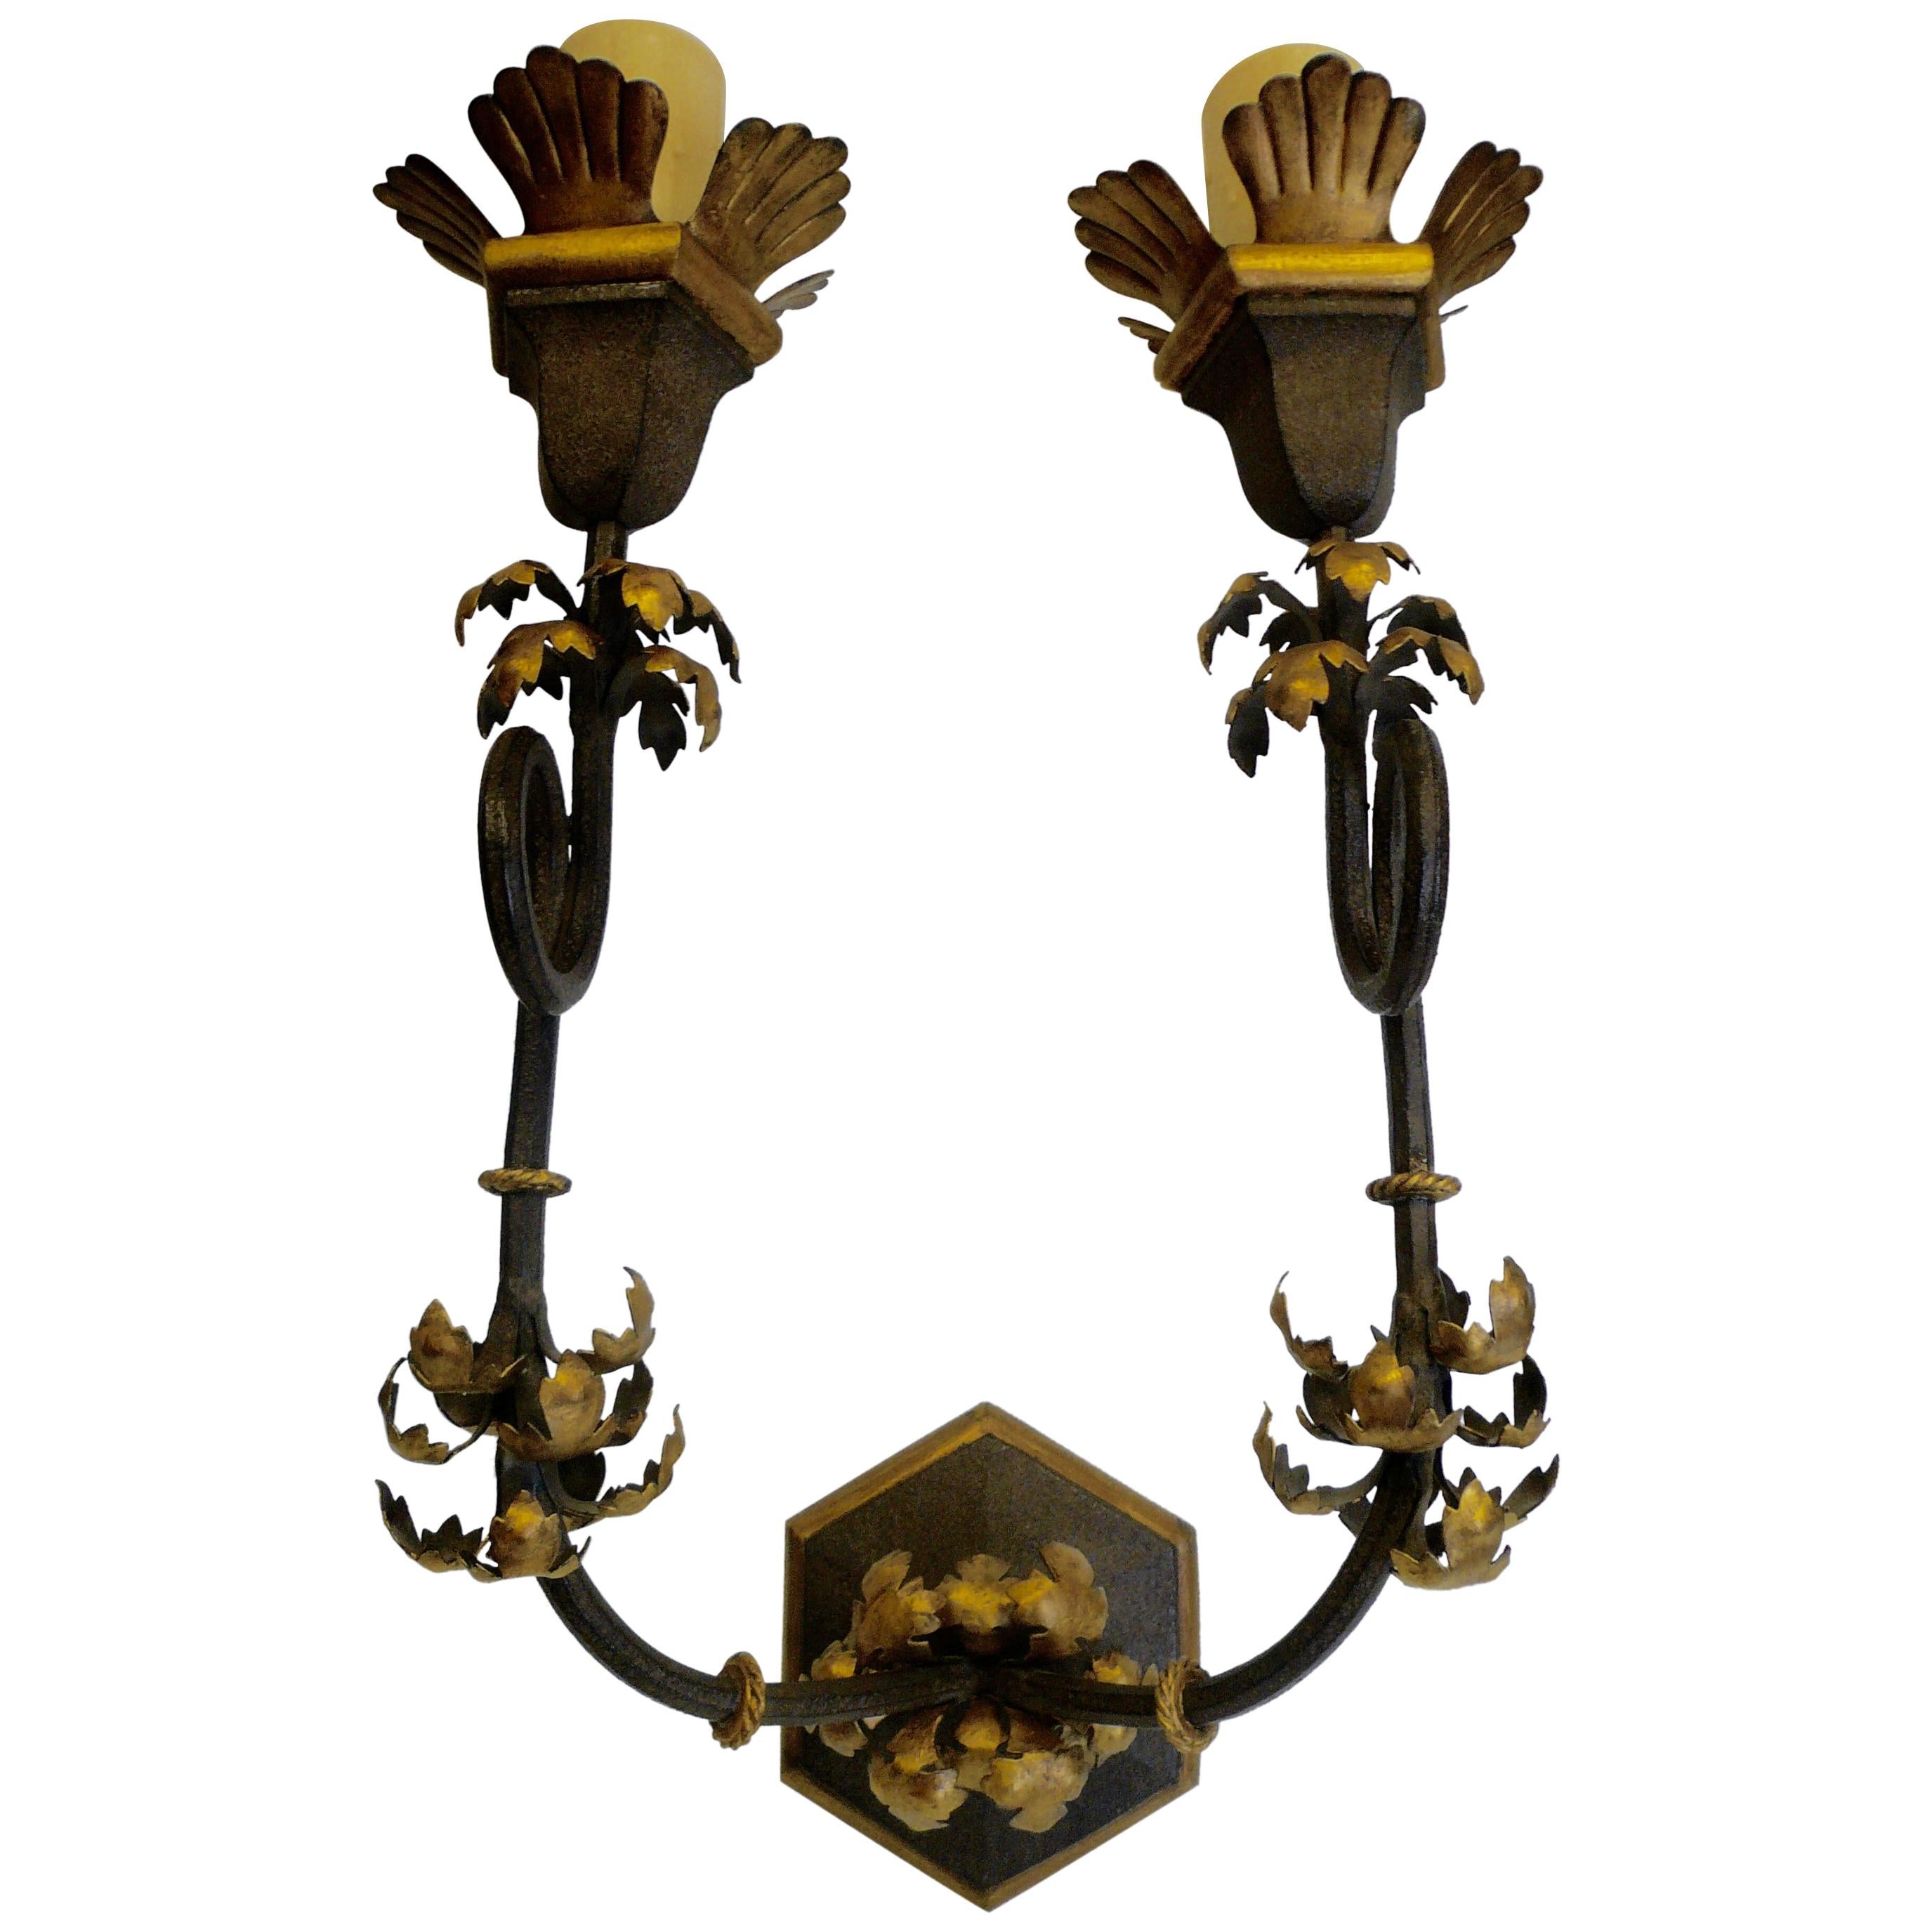 Large Pair of Wrought Iron Sconces with Gilt Highlights by Gregorius Pineo